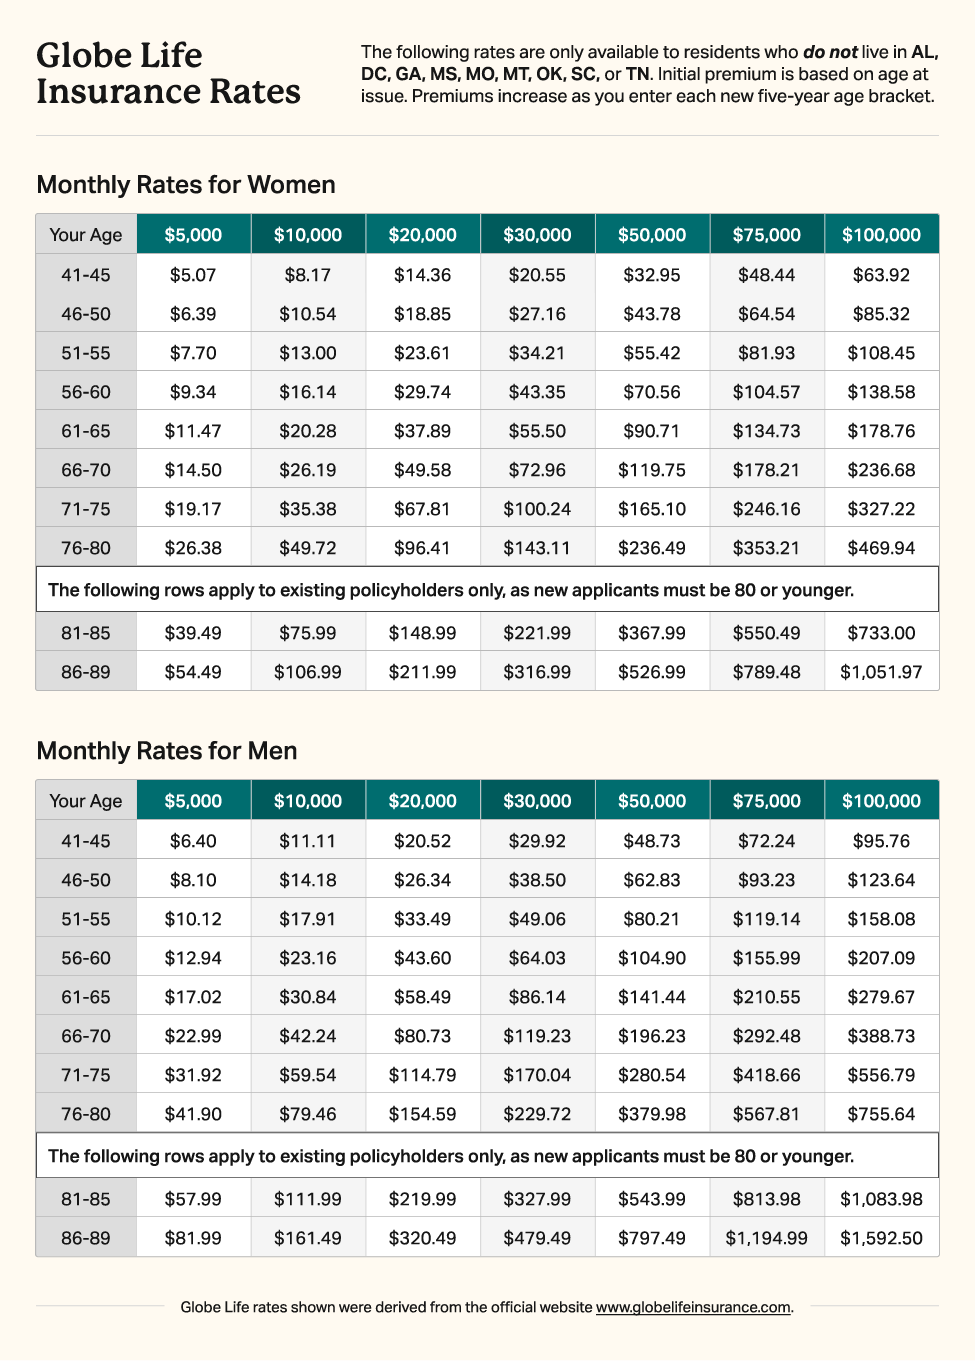 Globe Life Insurance rate table